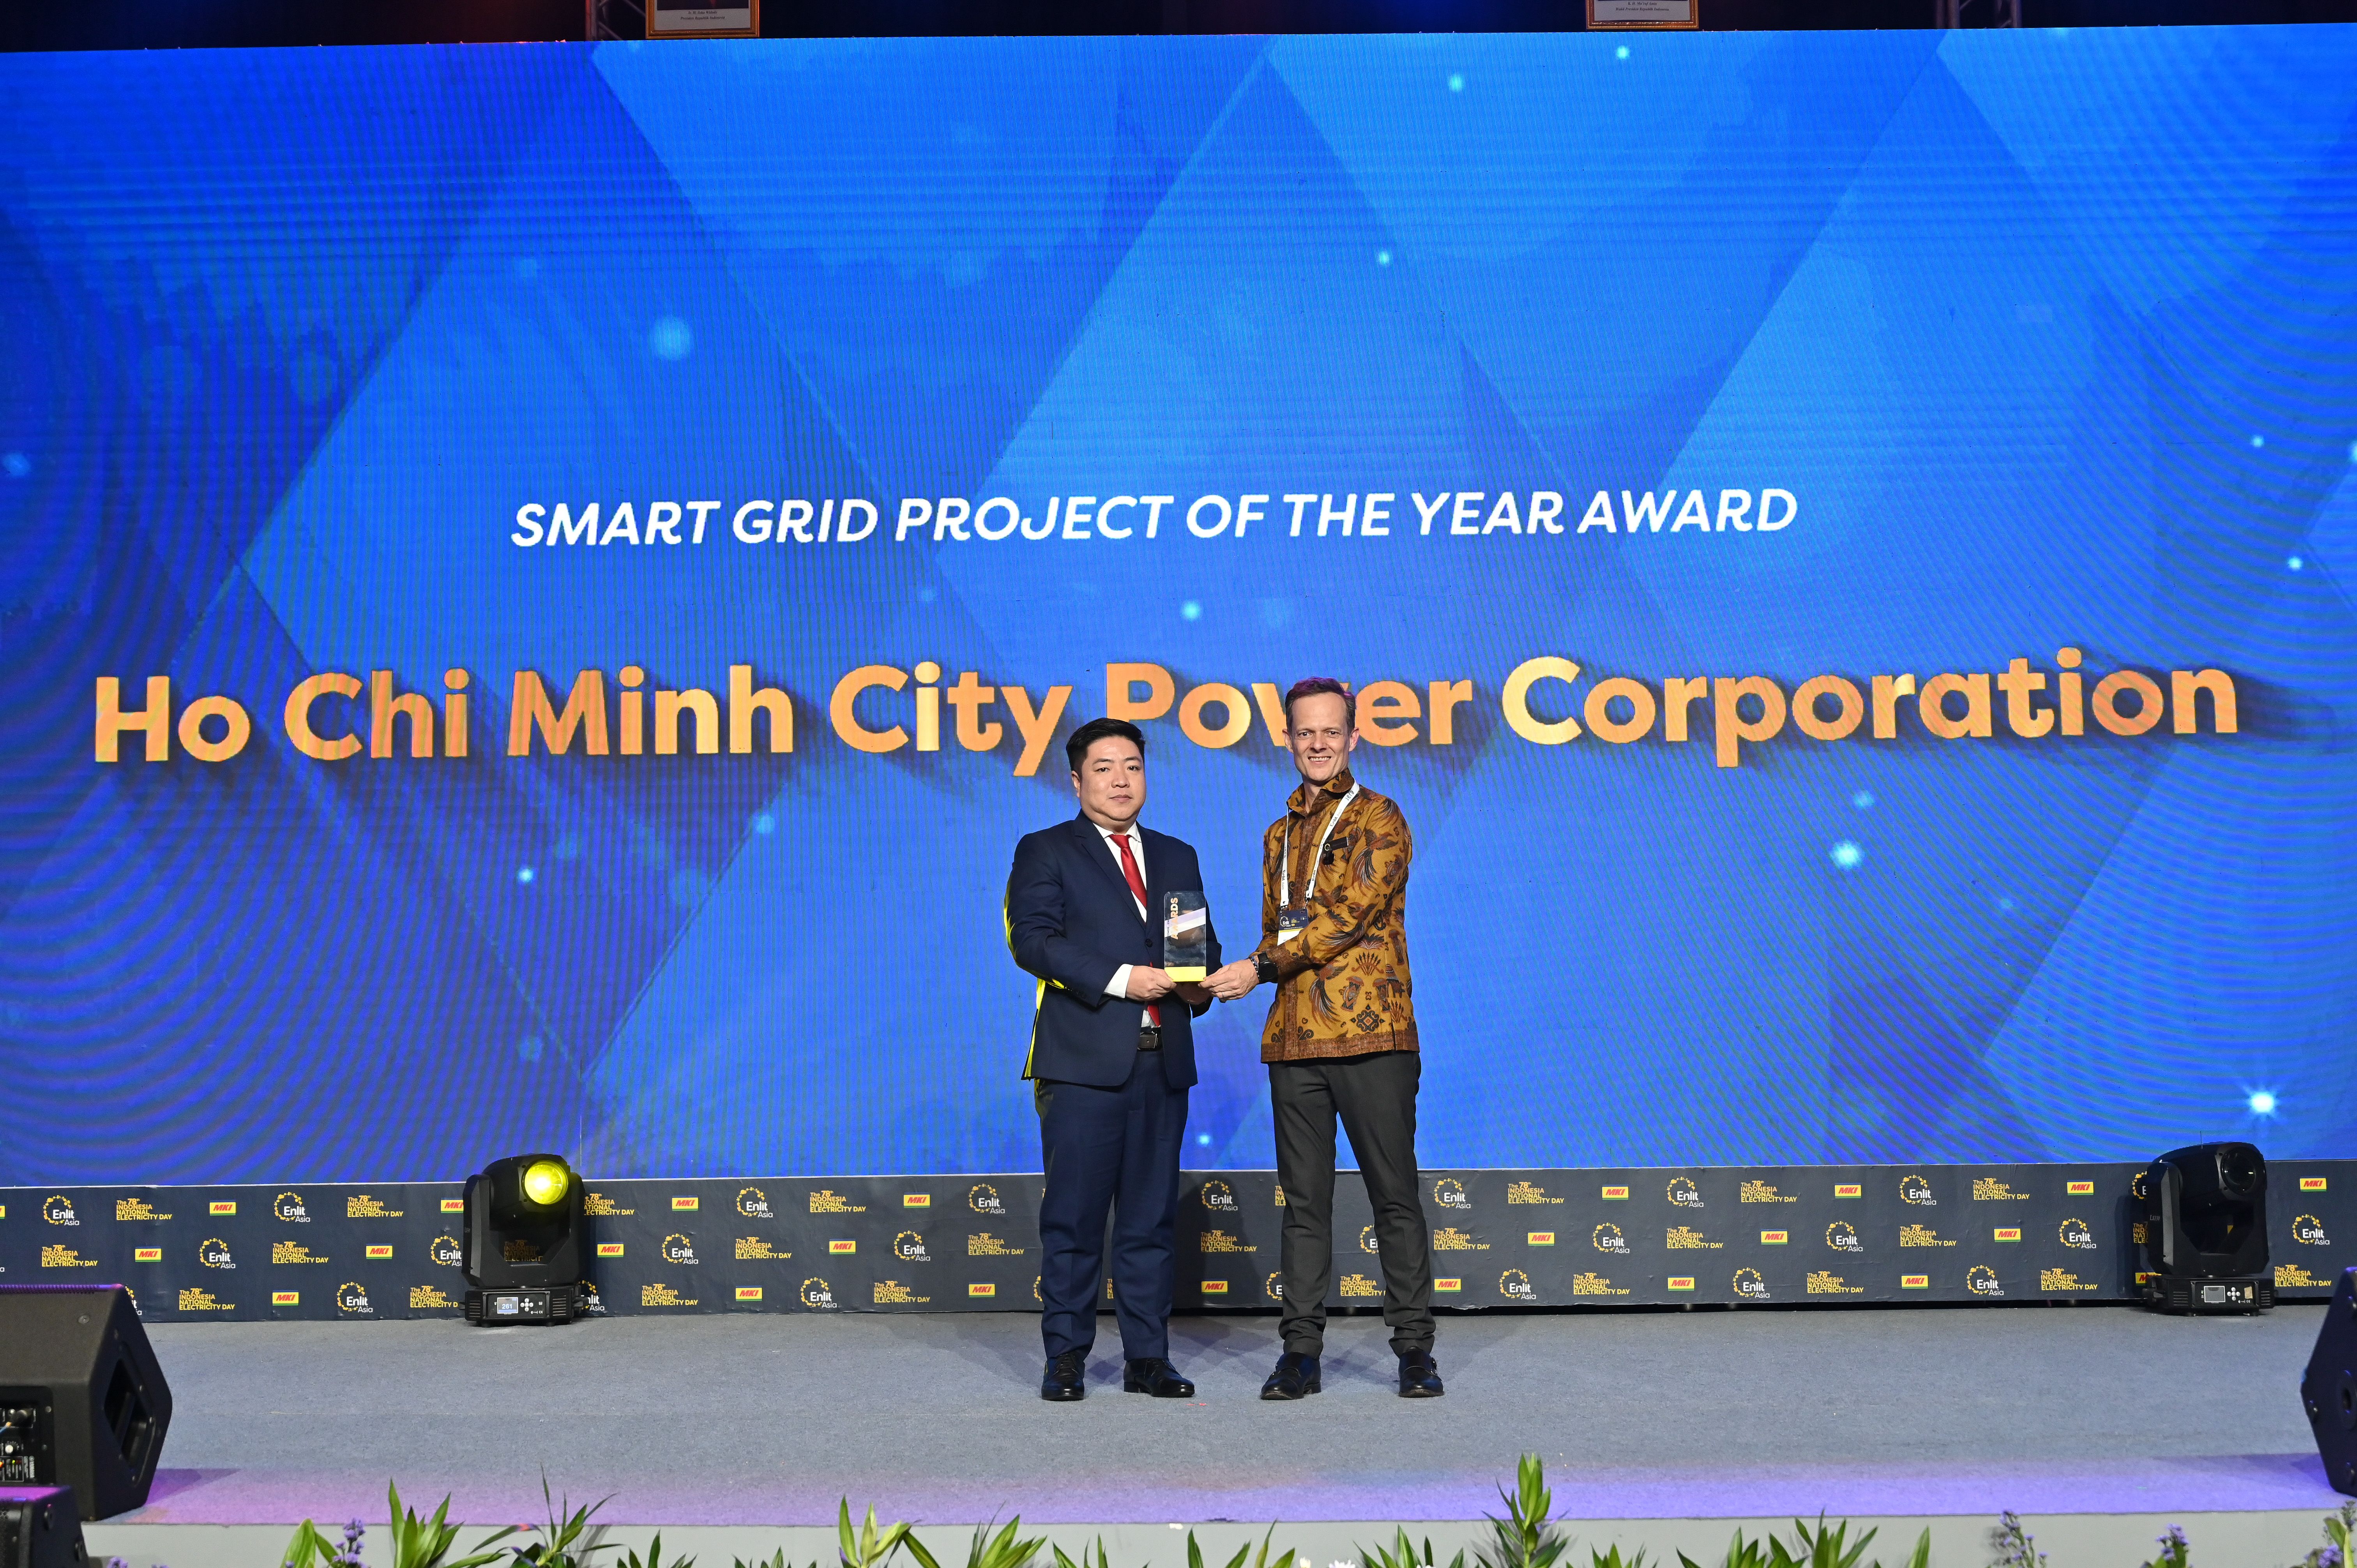 Smart Grid Project of the Year